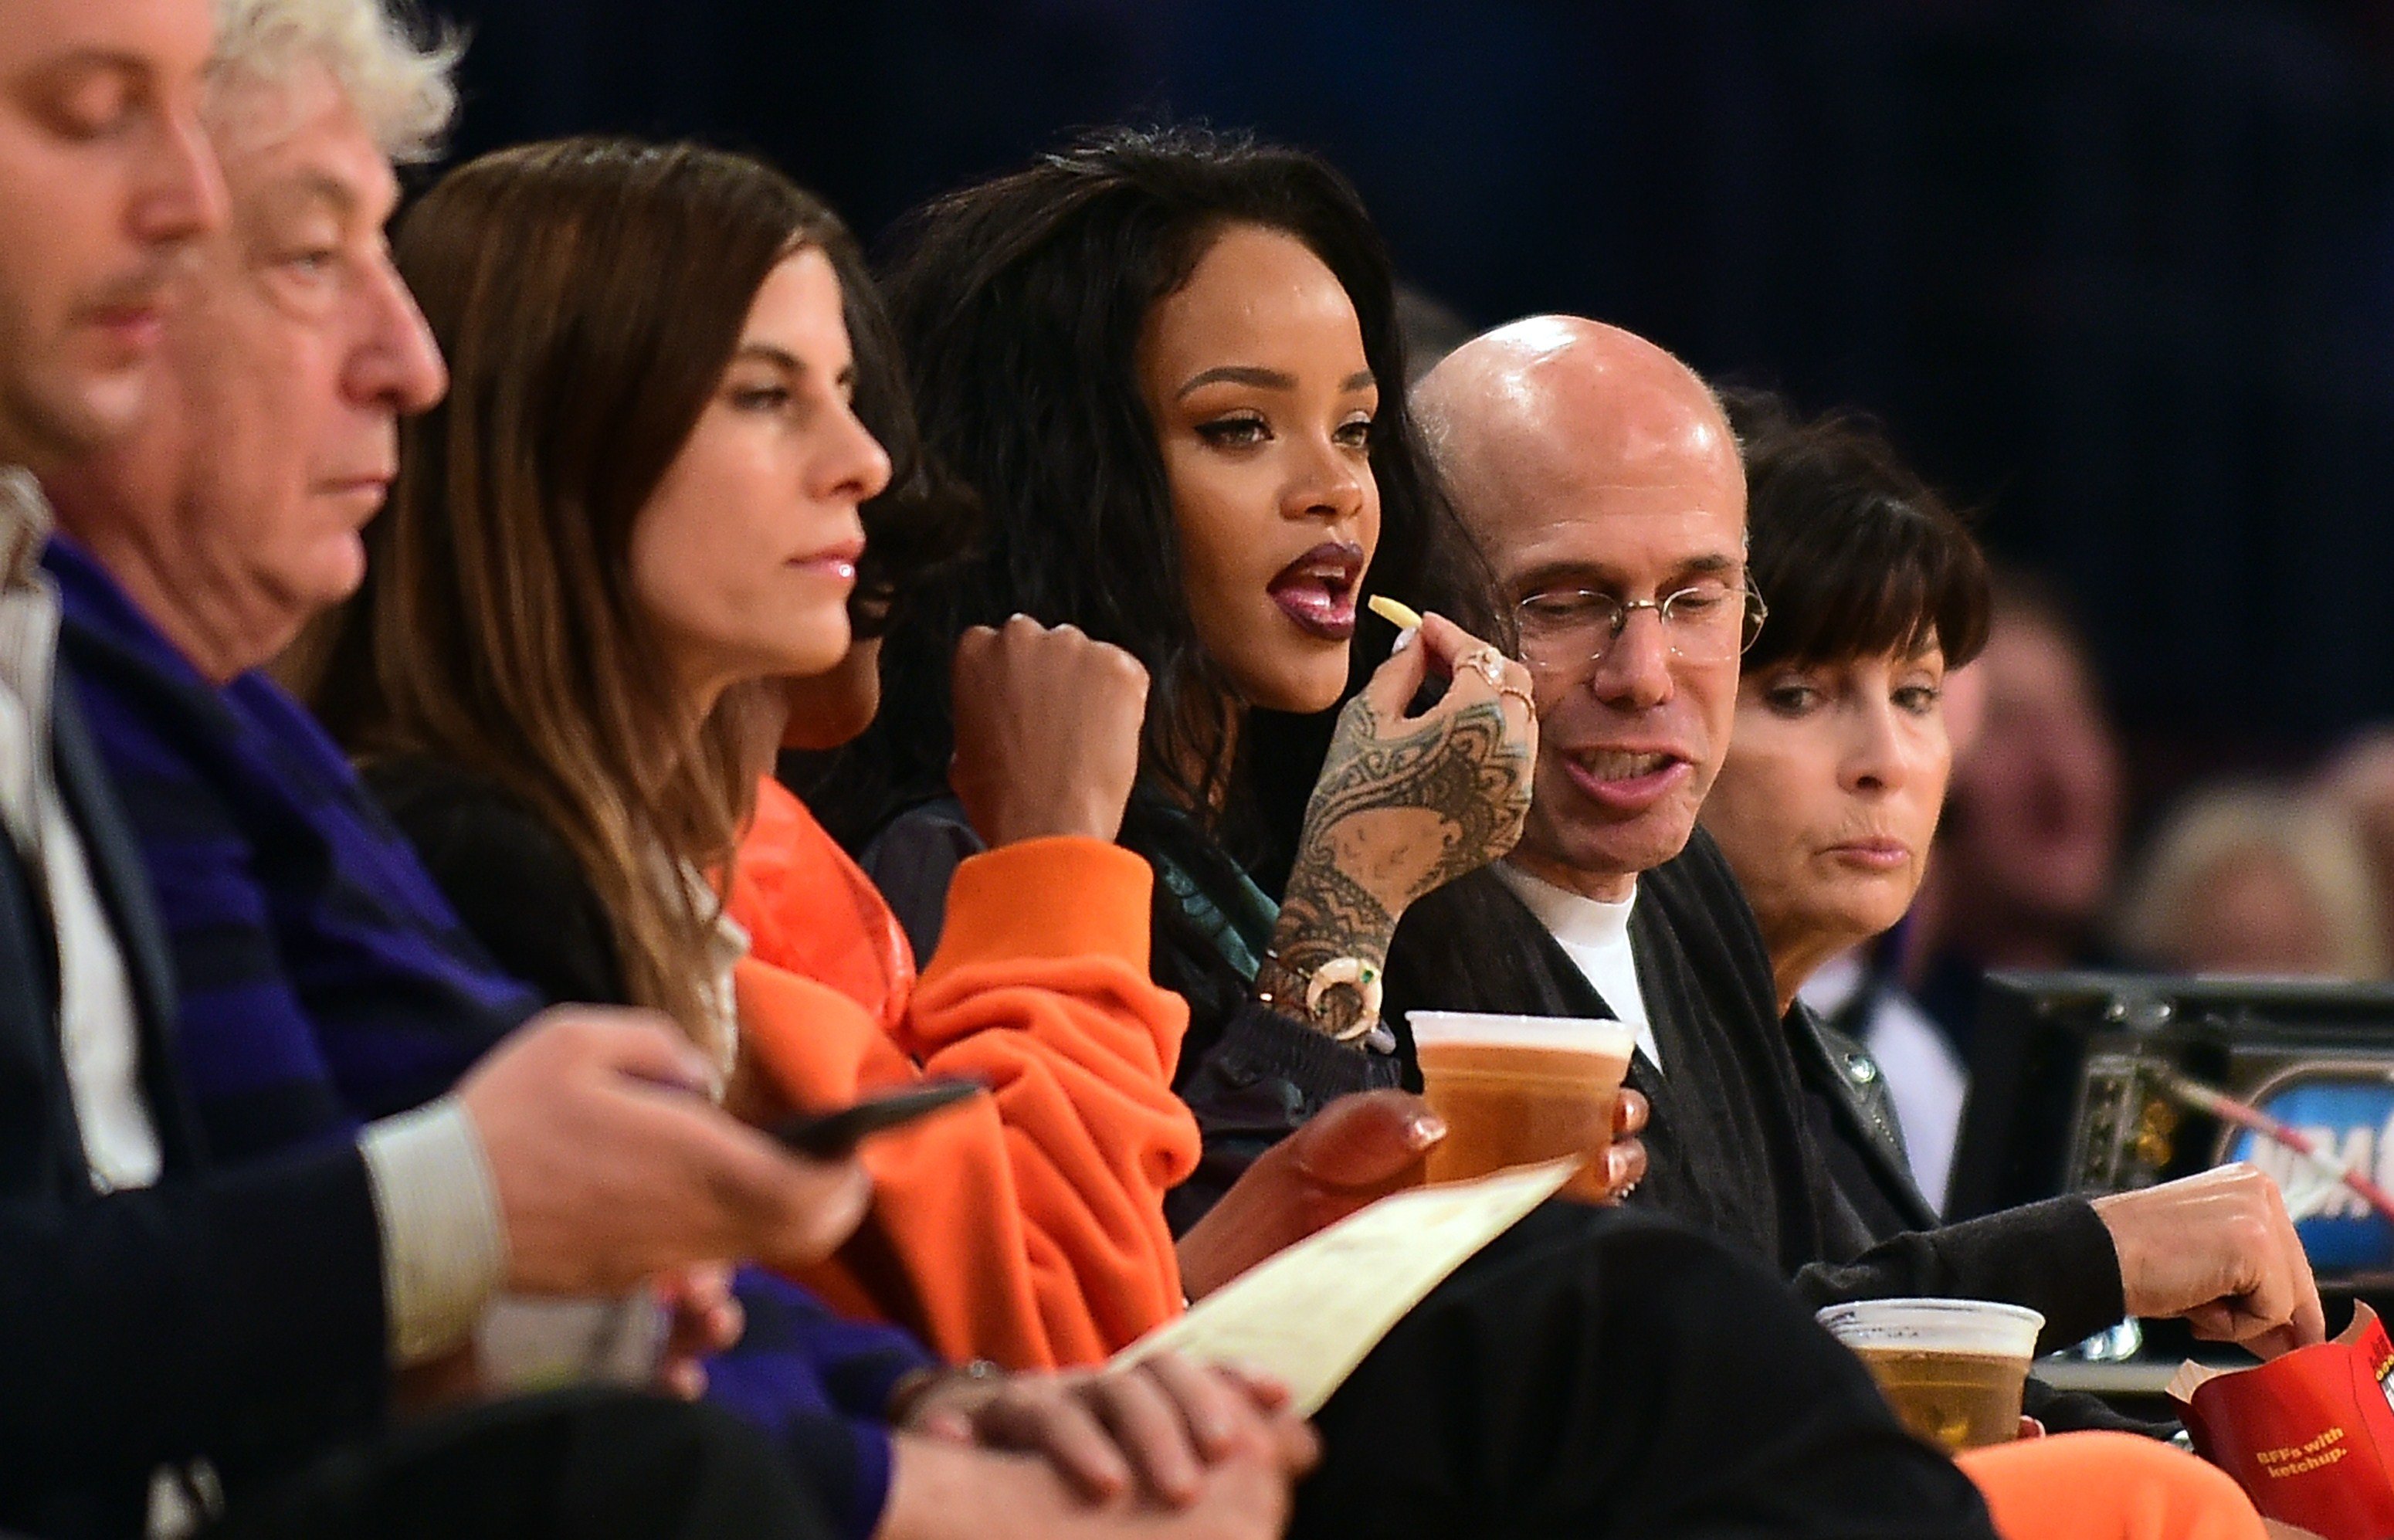 Rihanna enjoys a snack from courtside at an NBA game at Staples Center | Source: Getty Images